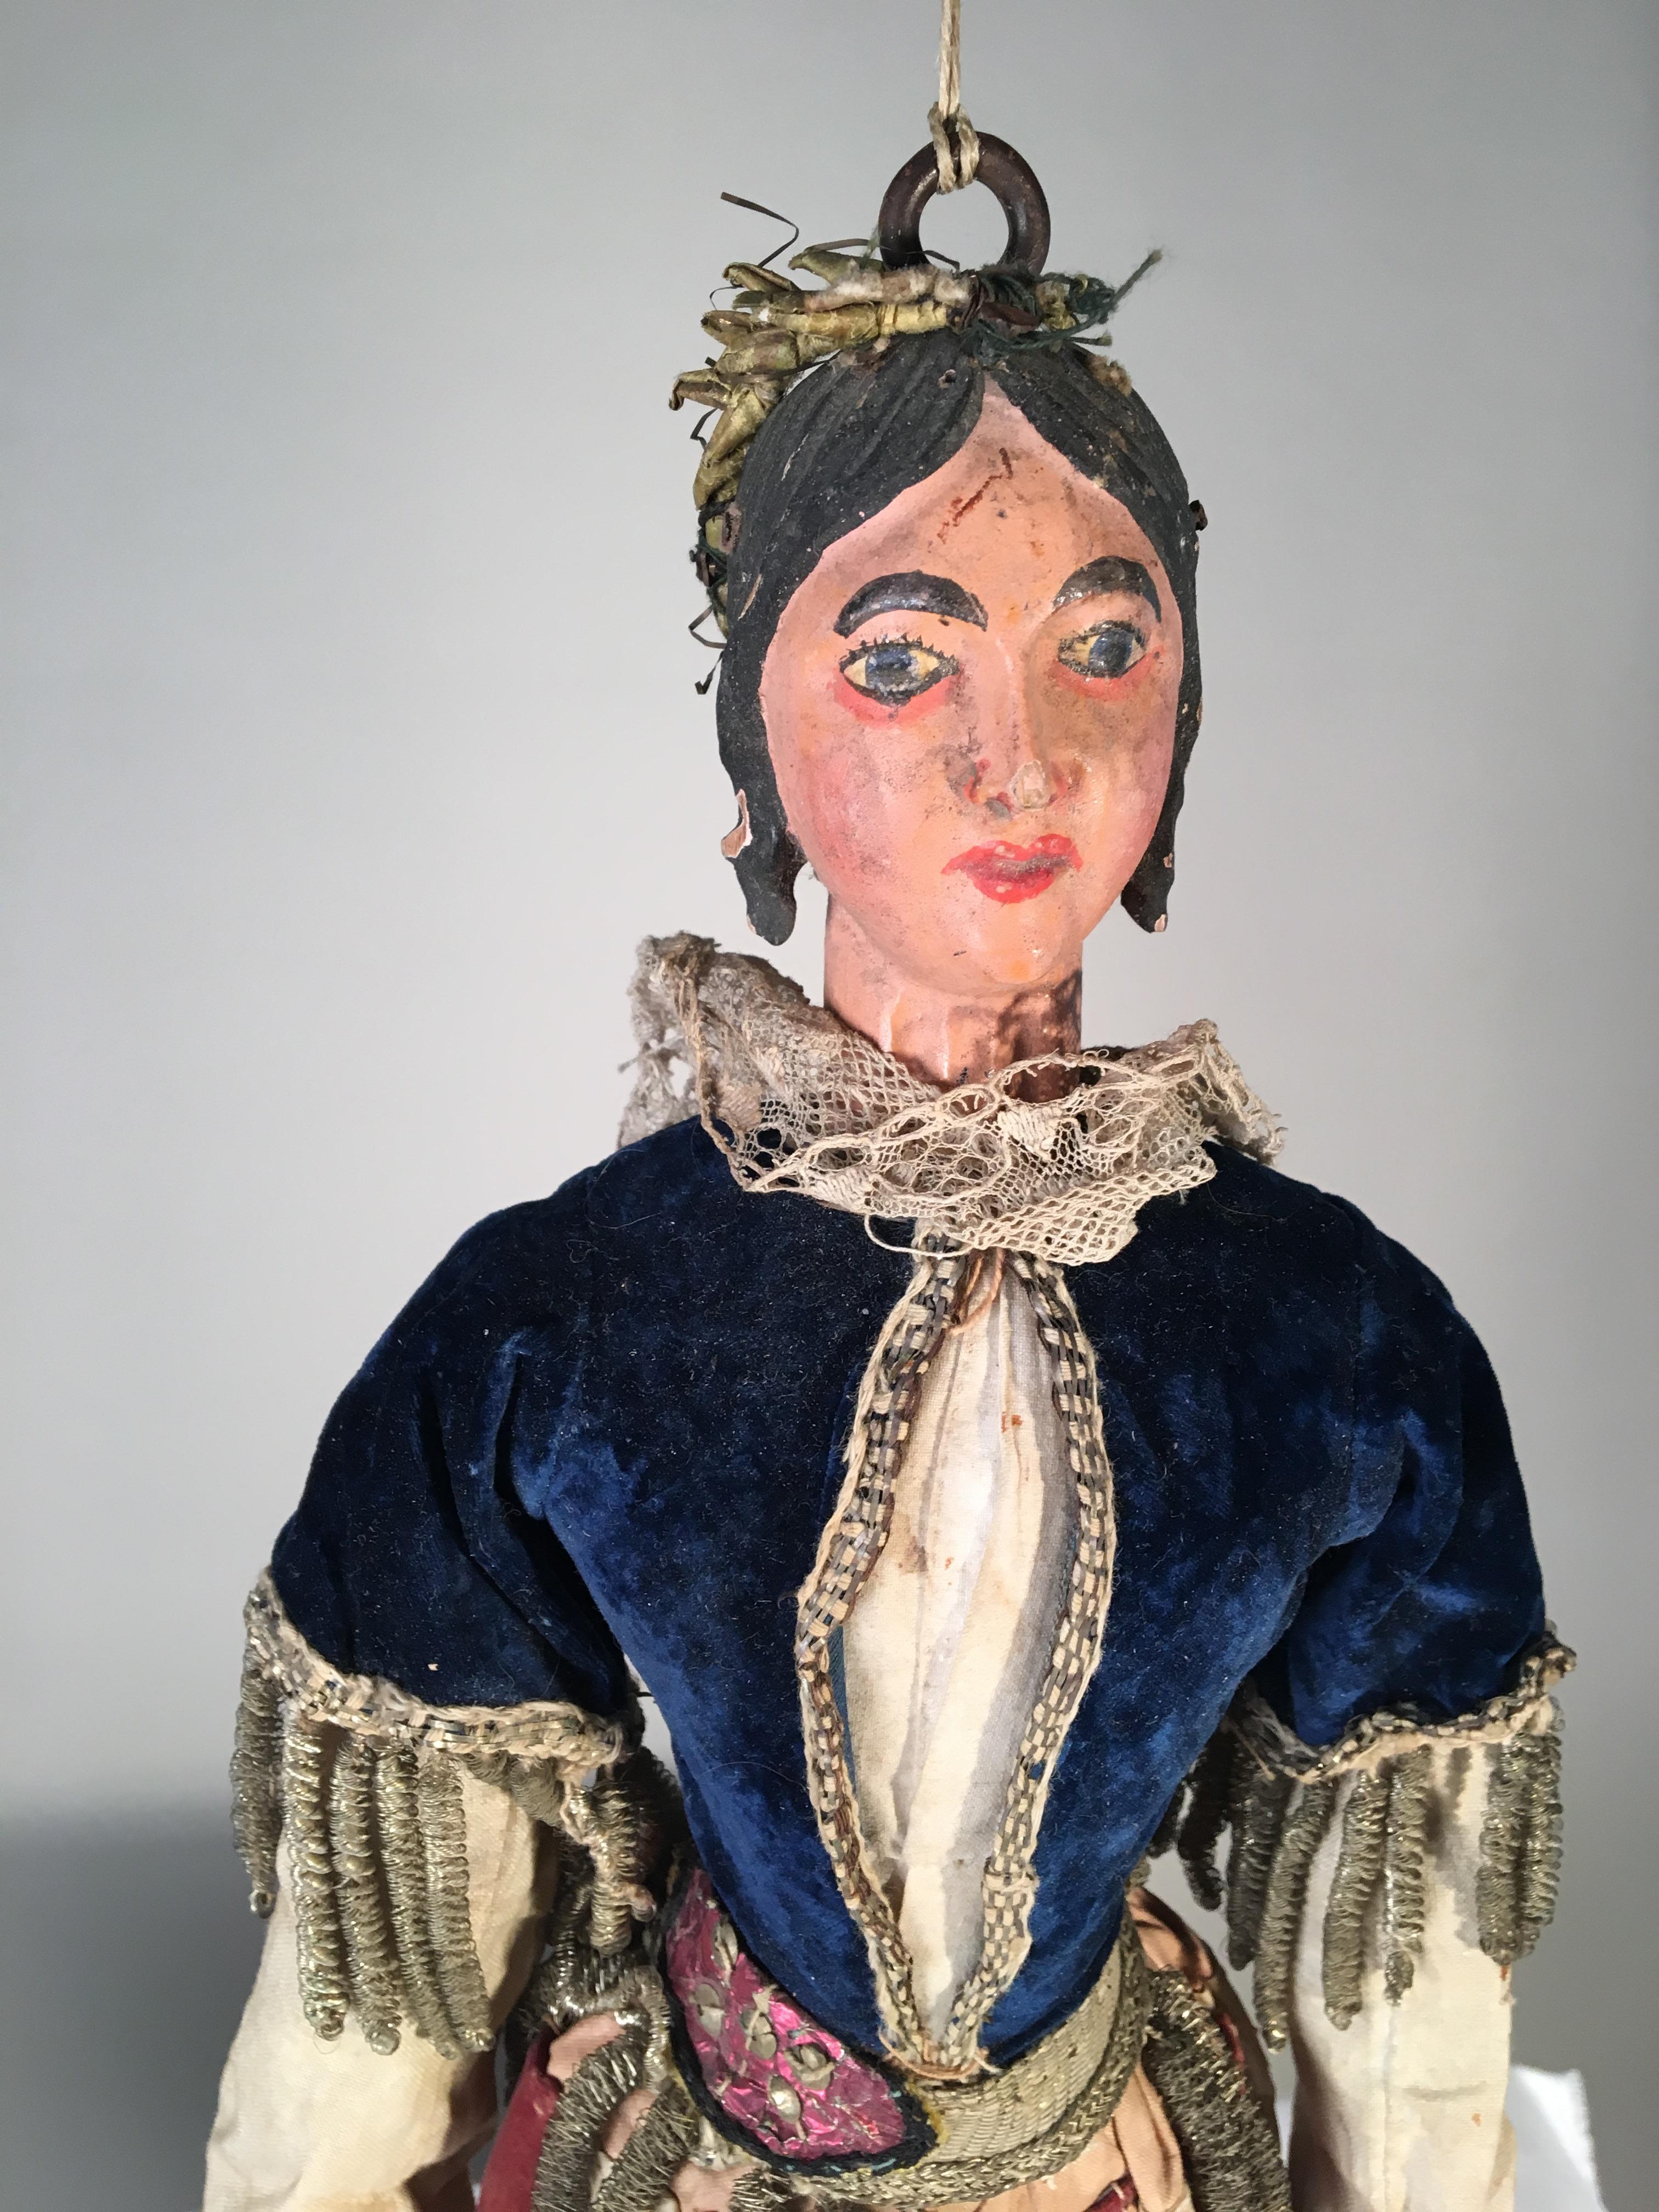 Two antique Italian puppets from the 